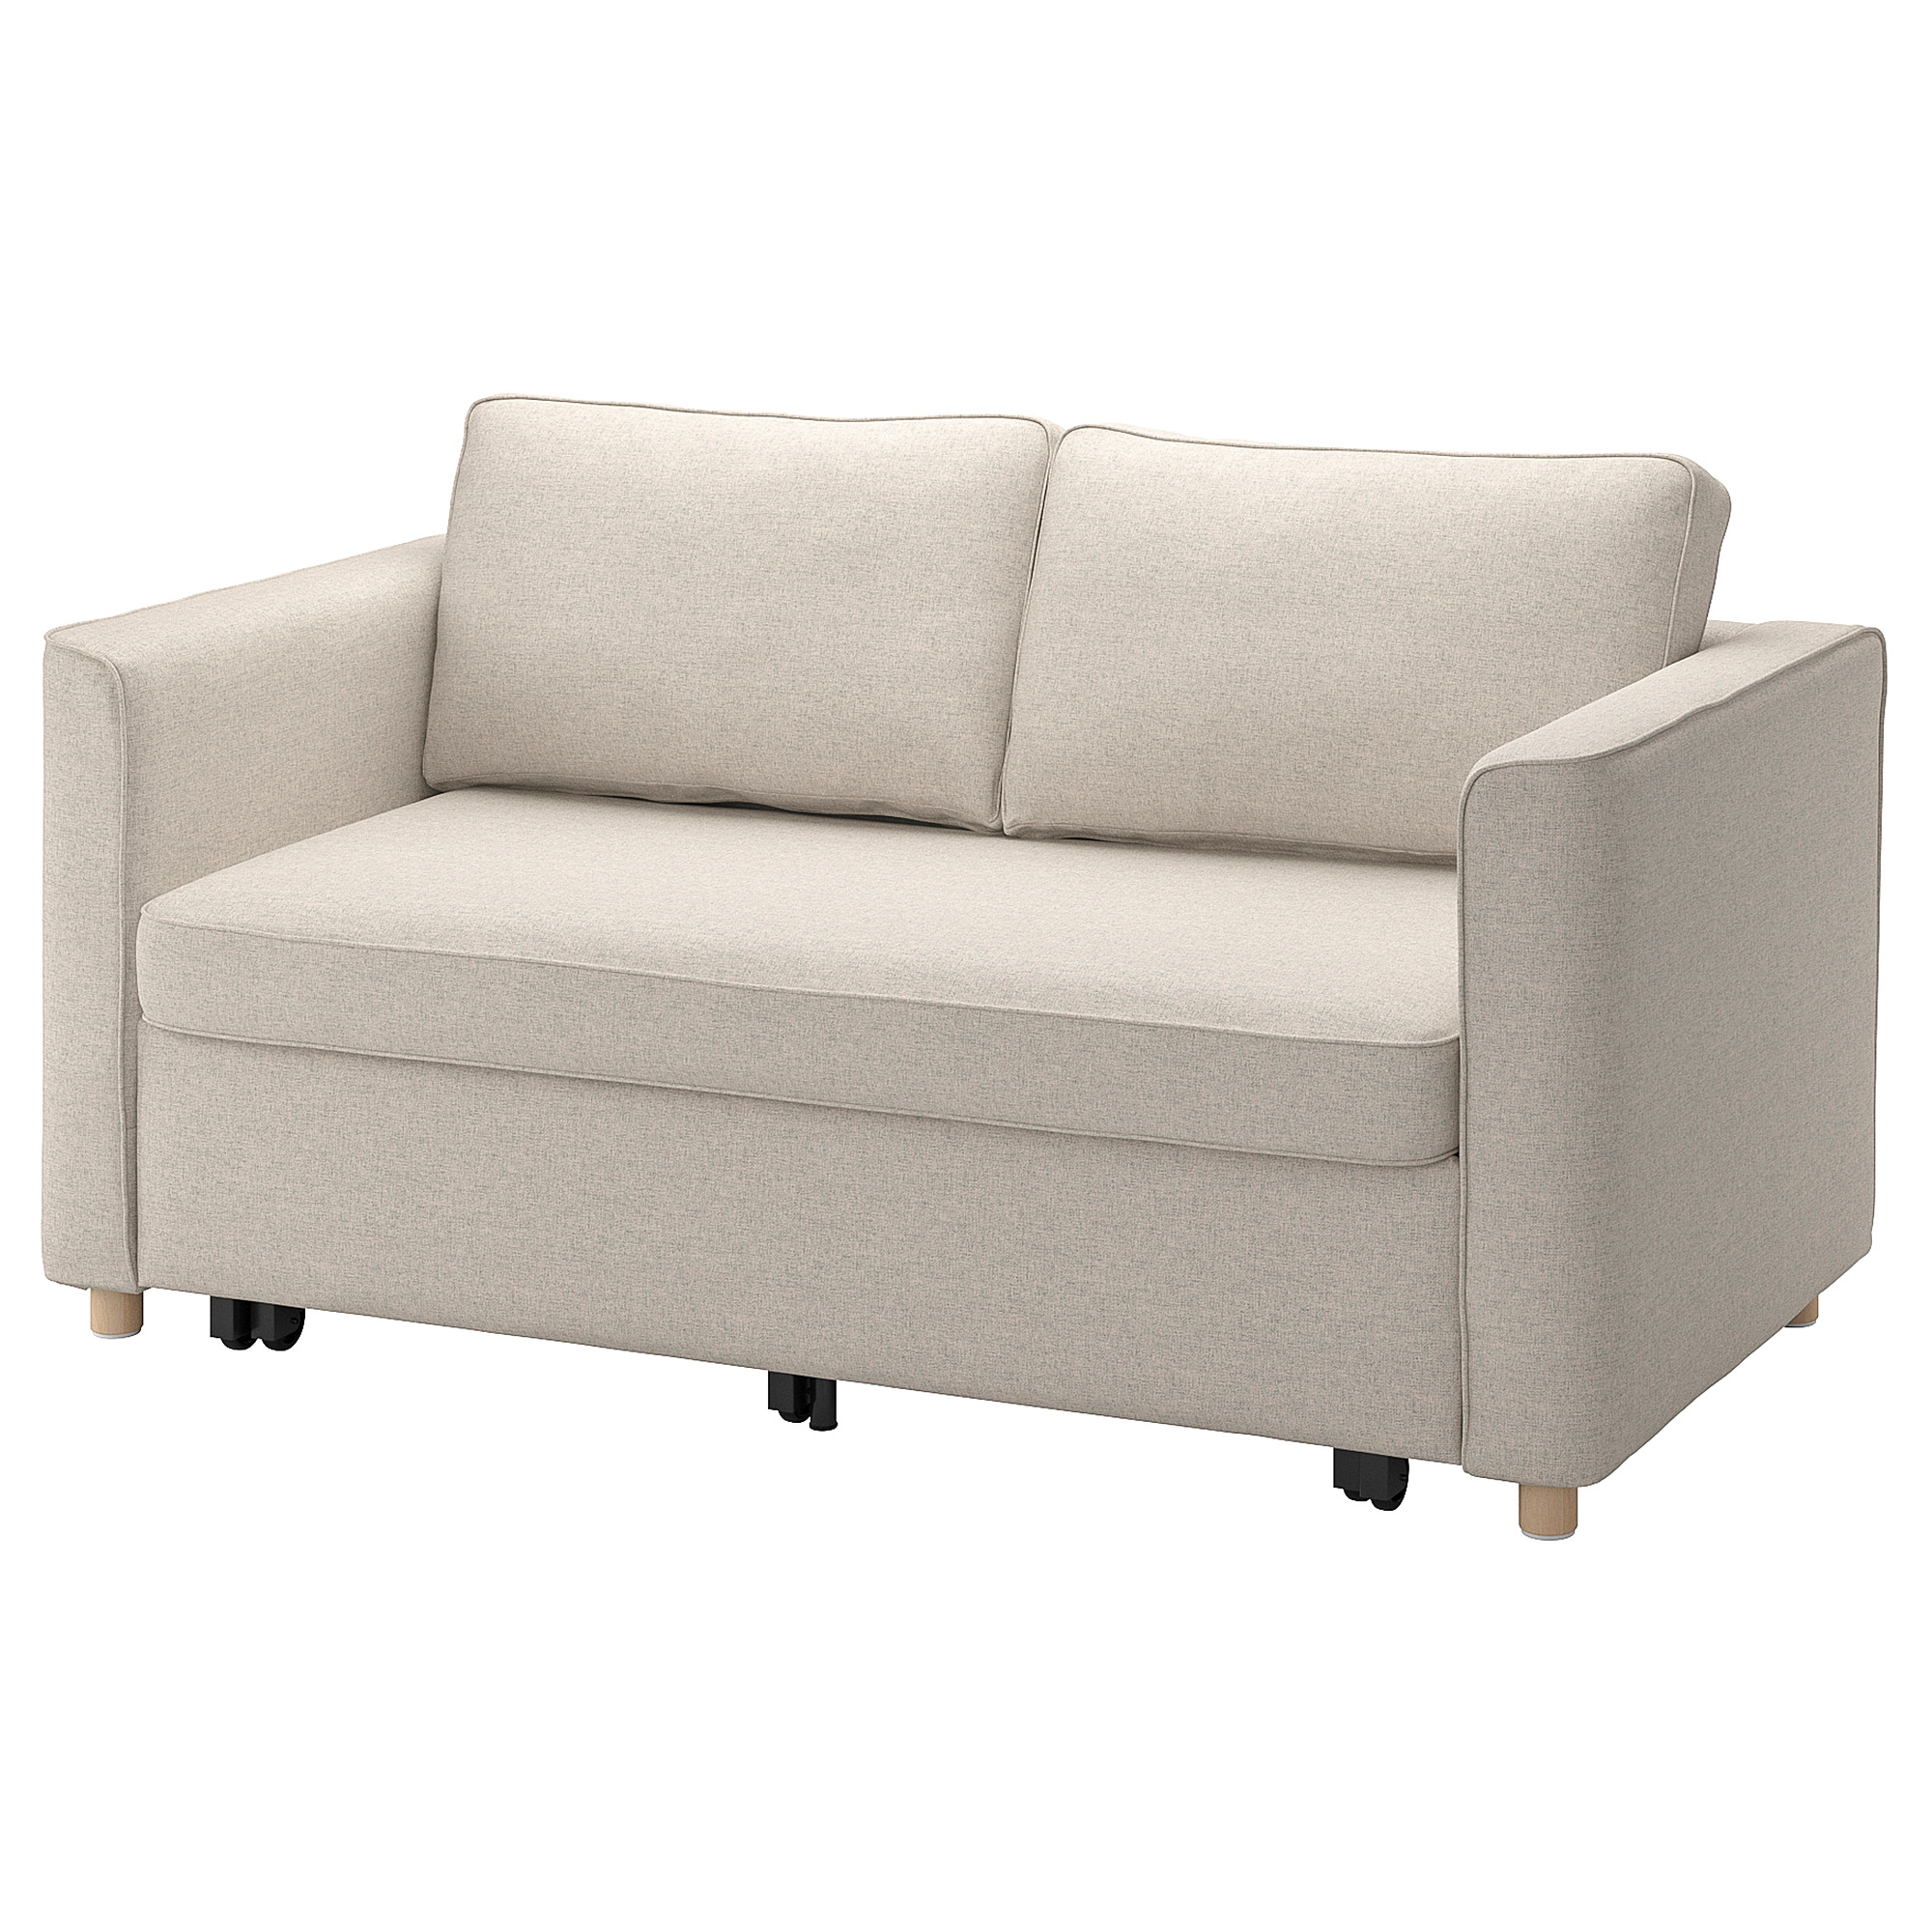 PÄRUP cover for 2-seat sofa-bed